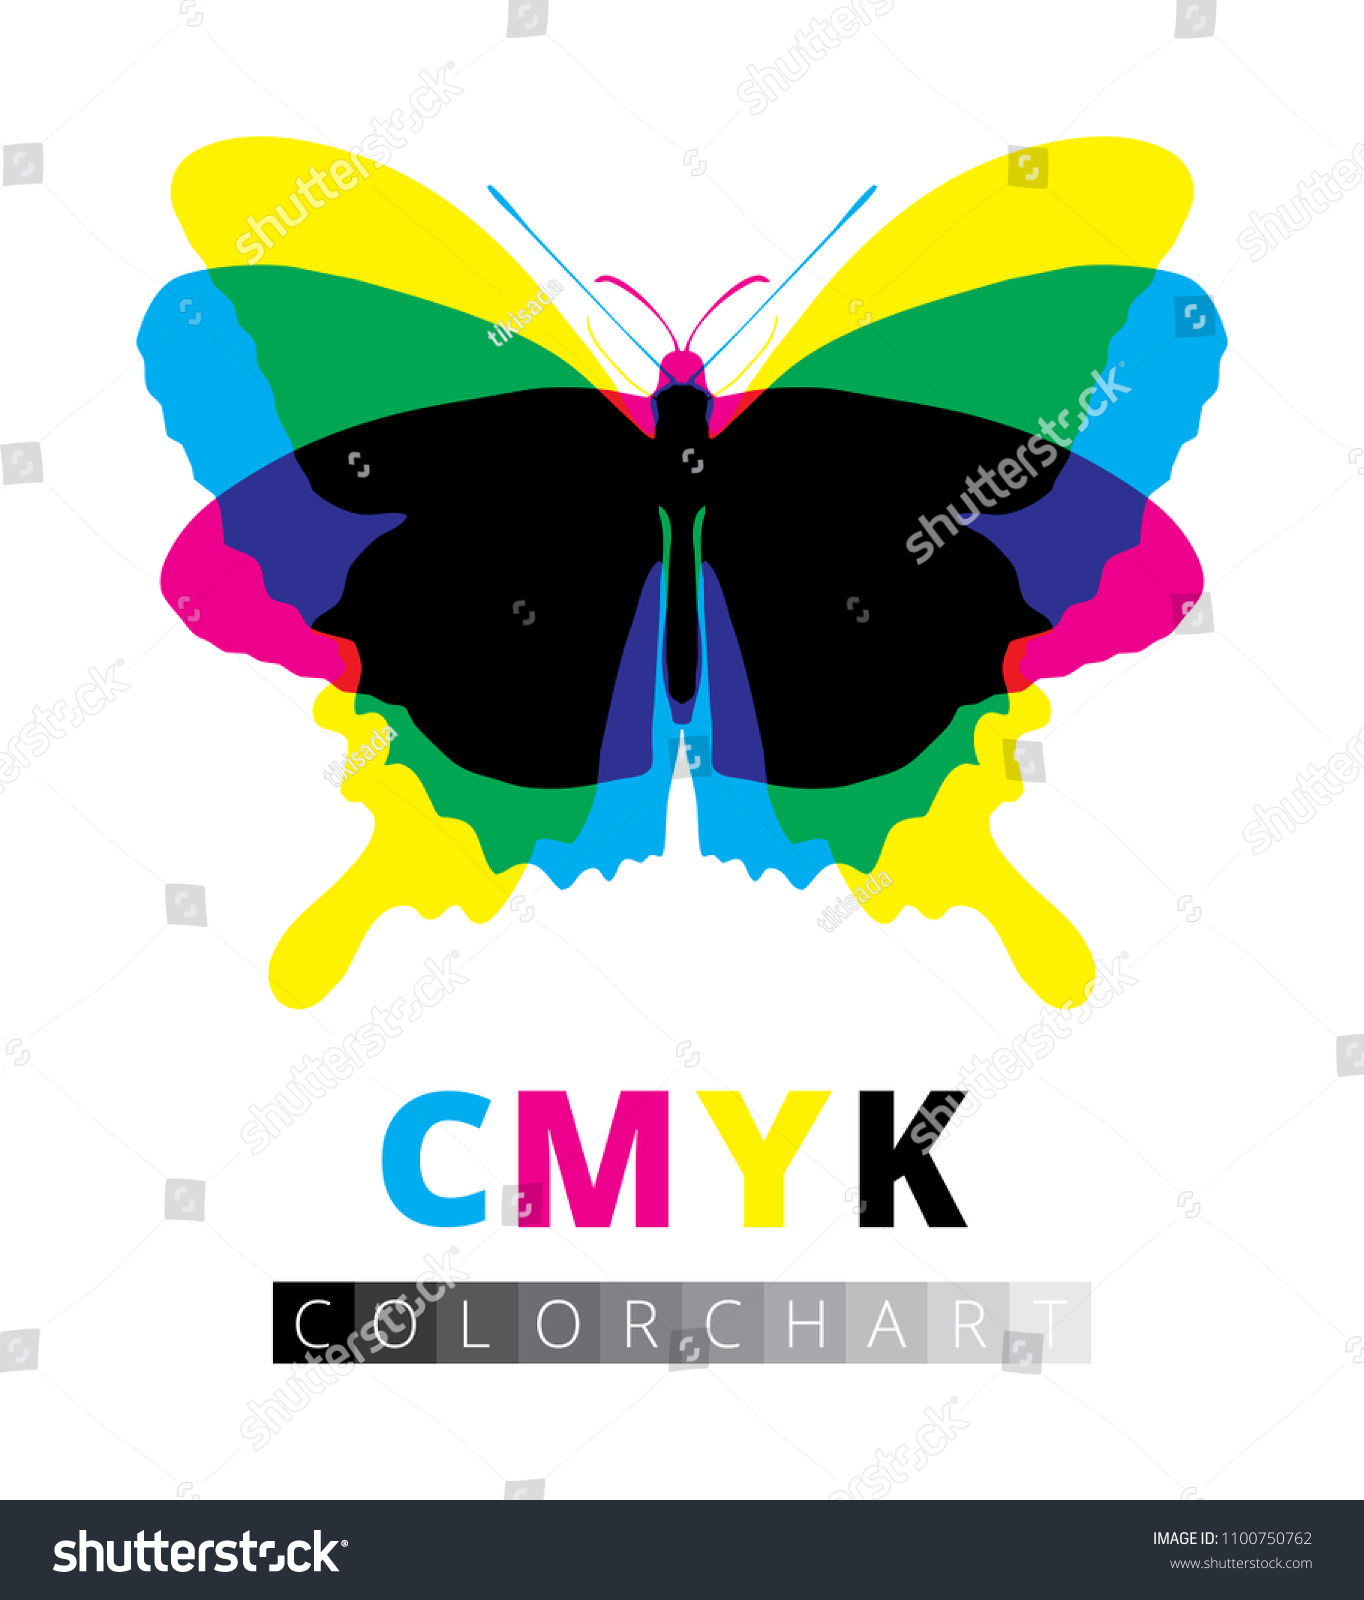 SVG of Animal icon silhouette vector, butterfly cartoon shadow symbol, CMYK color chart test print, black bugs figure isolated on white background. Cyan magenta yellow image and gray scale offset template. svg